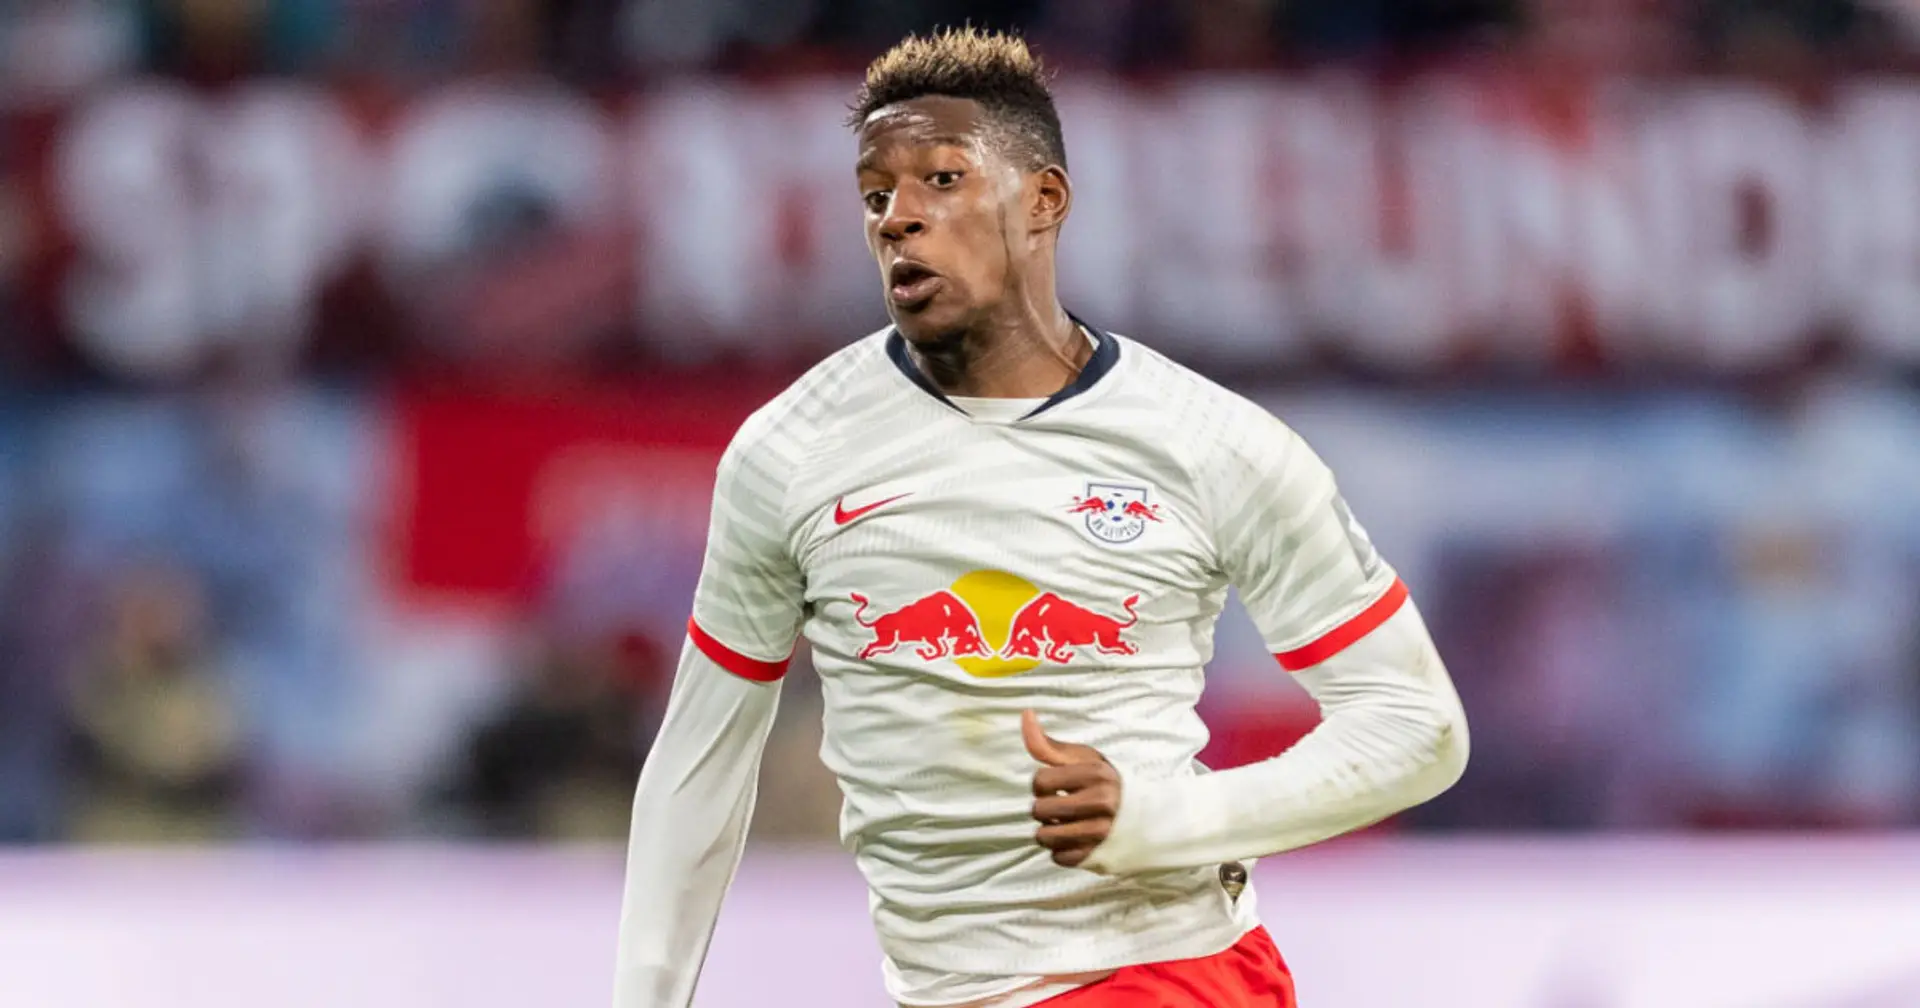 Klopp reportedly makes personal contact with £14m-rated RB Leipzig defender Nordi Mukiele amid PSG interest